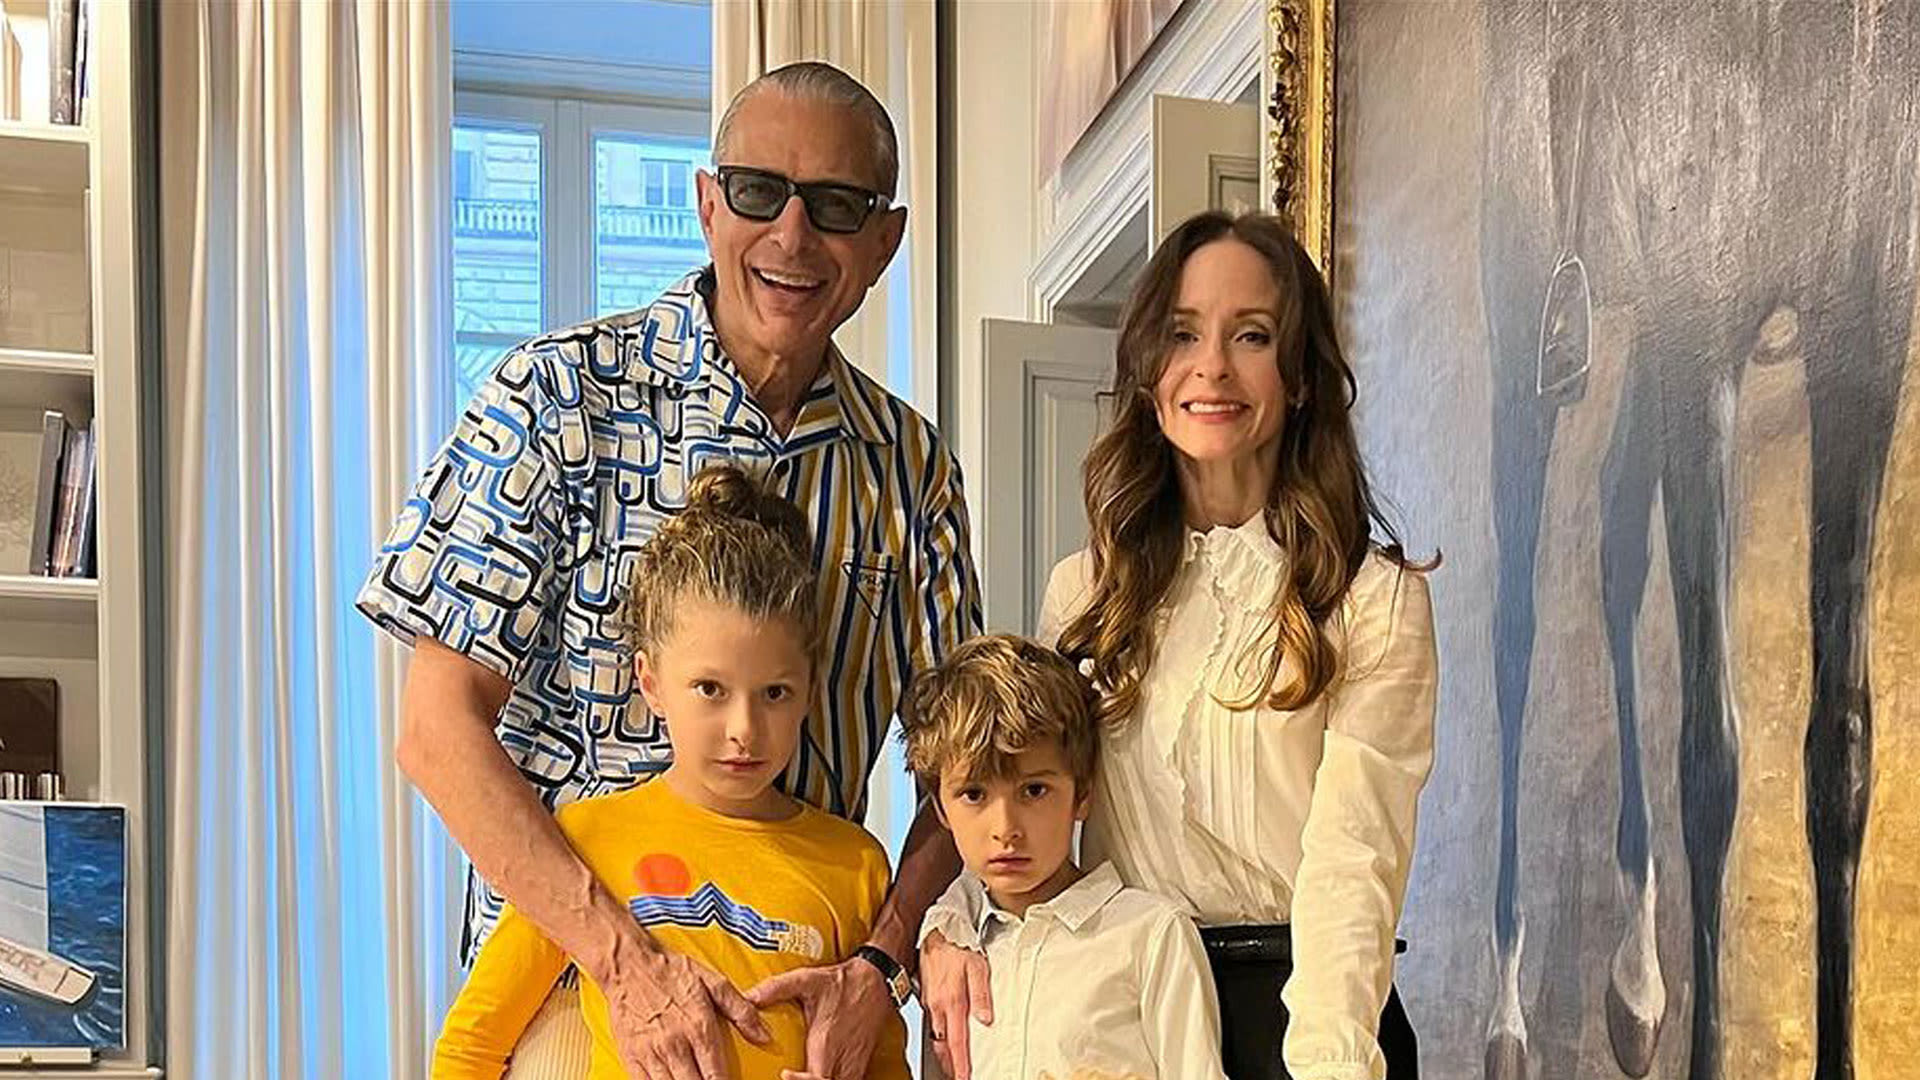 All to know about Jeff Goldblum's children, Charlie and River